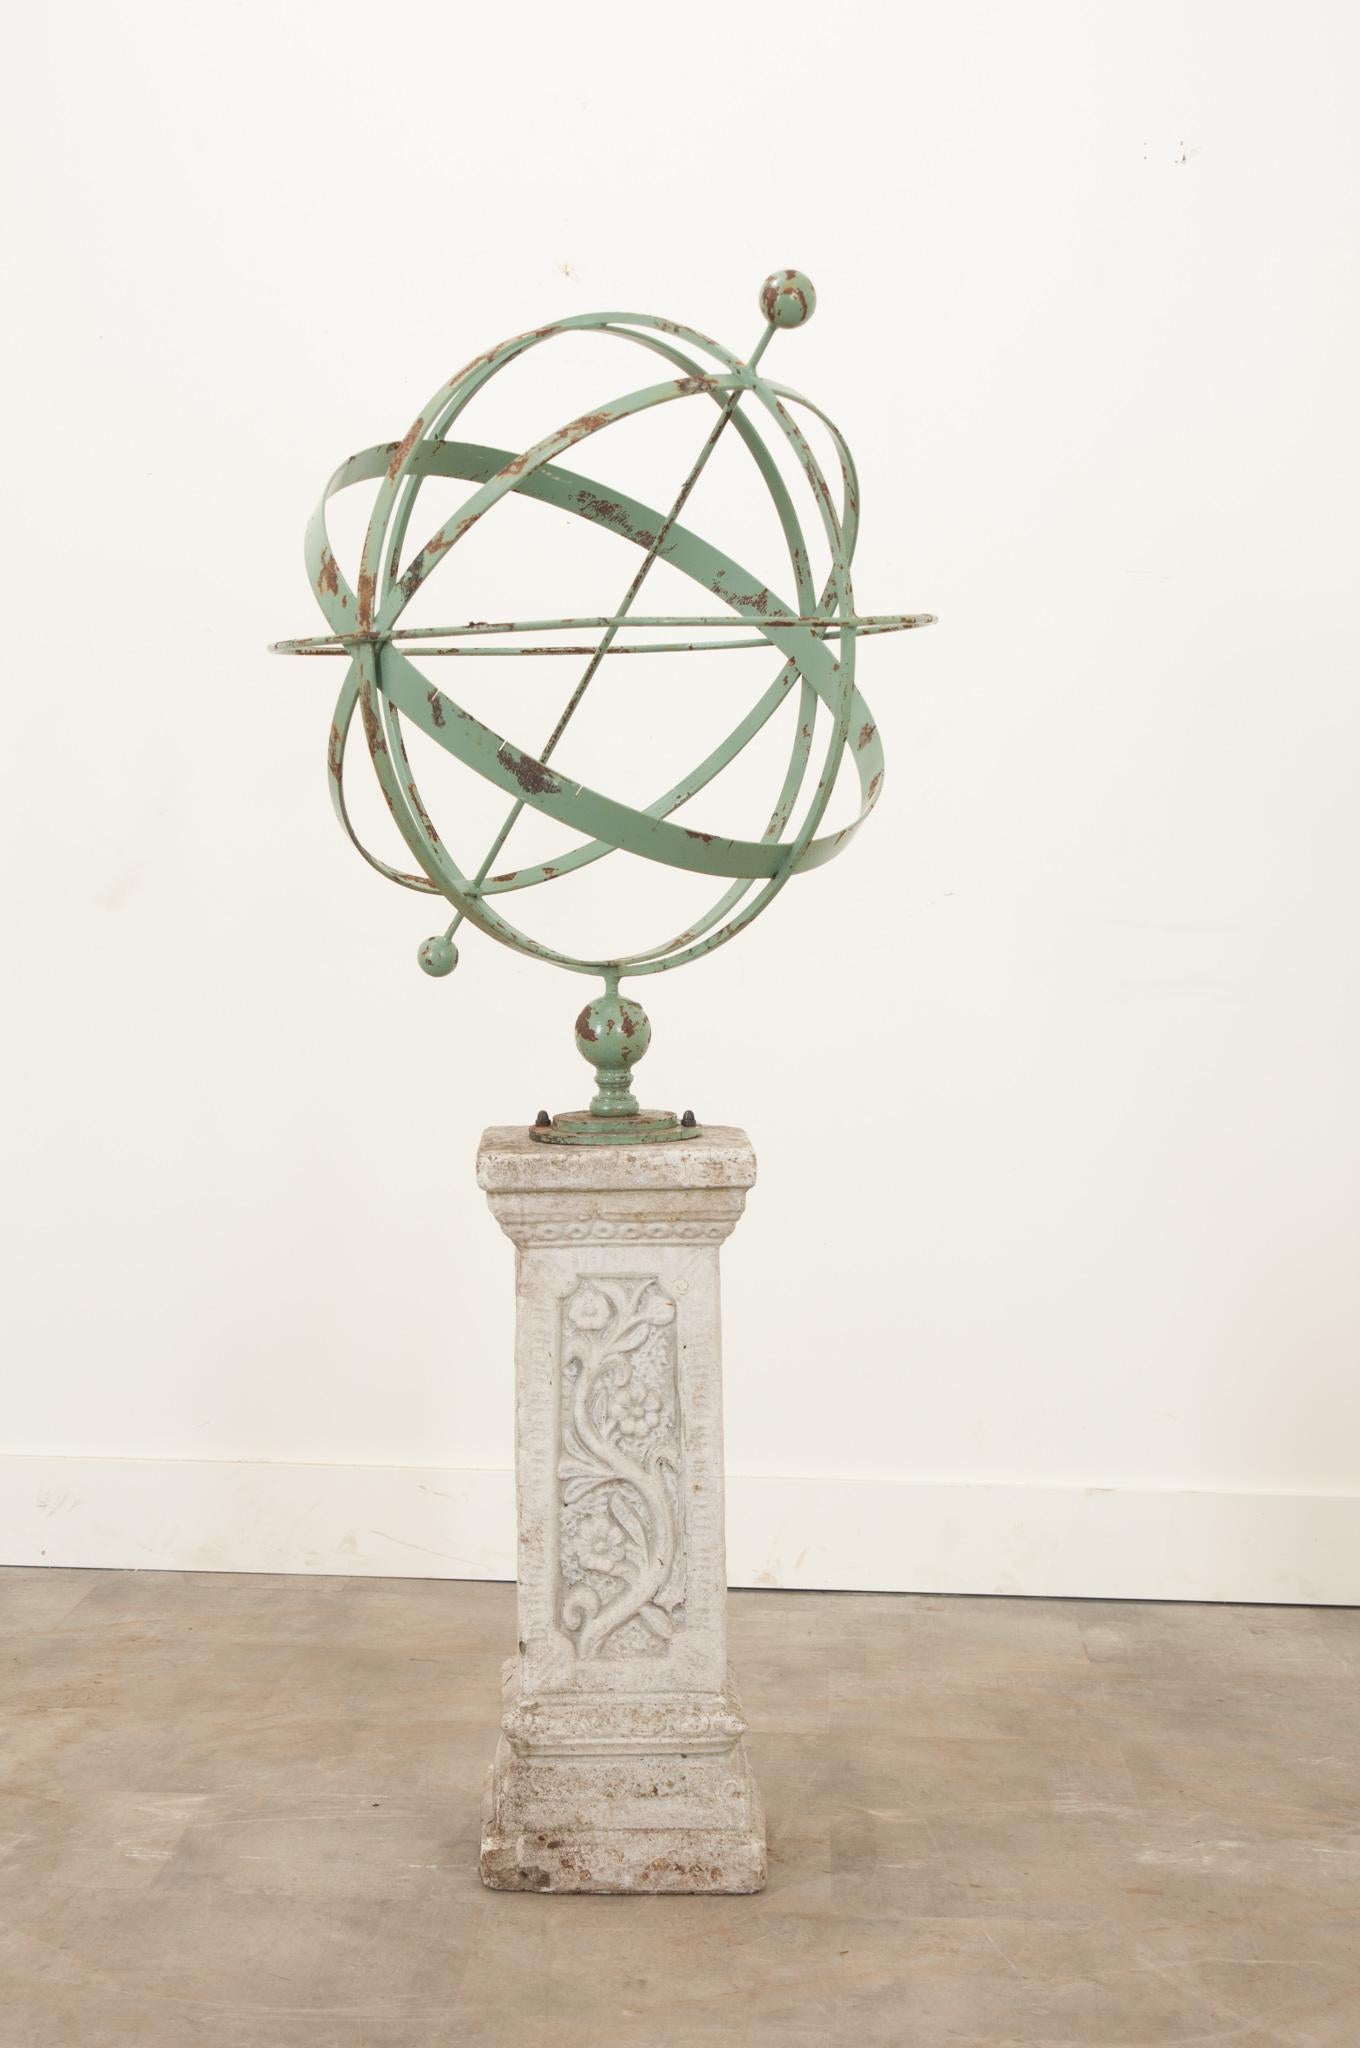 English gardens often have an armillary. These instruments were designed by the ancient Greeks to theoretically track the planets and stars. Adding a touch of whimsy, this maintenance free garden element will enhance any outdoor space. Each side of